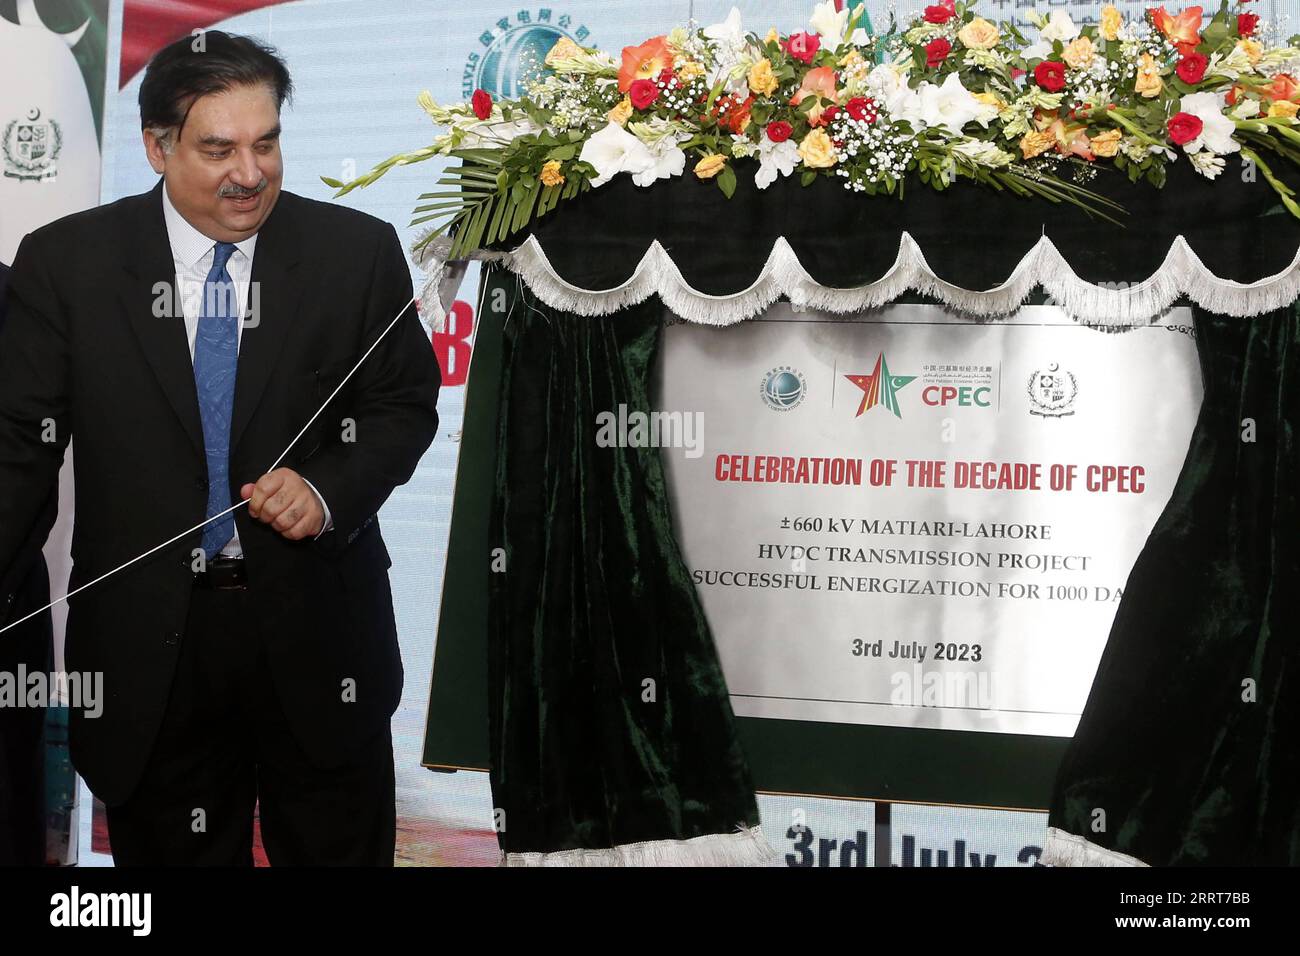 230704 -- LAHORE, July 4, 2023 -- Pakistan s Minister for Power Khurram Dastgir Khan unveils a plaque during the celebrations of safe operation for 1,000-days of the À660kV Matiari-Lahore high-voltage direct current HVDC transmission project under the China-Pakistan Economic Corridor CPEC on the outskirts of Lahore, Pakistan on July 3, 2023. Pakistan s Minister for Power Khurram Dastgir Khan said Monday that with the inception of the China-Pakistan Economic Corridor CPEC 10 years ago, the relations between the two countries qualitatively changed into a deep economic partnership. TO GO WITH CPE Stock Photo